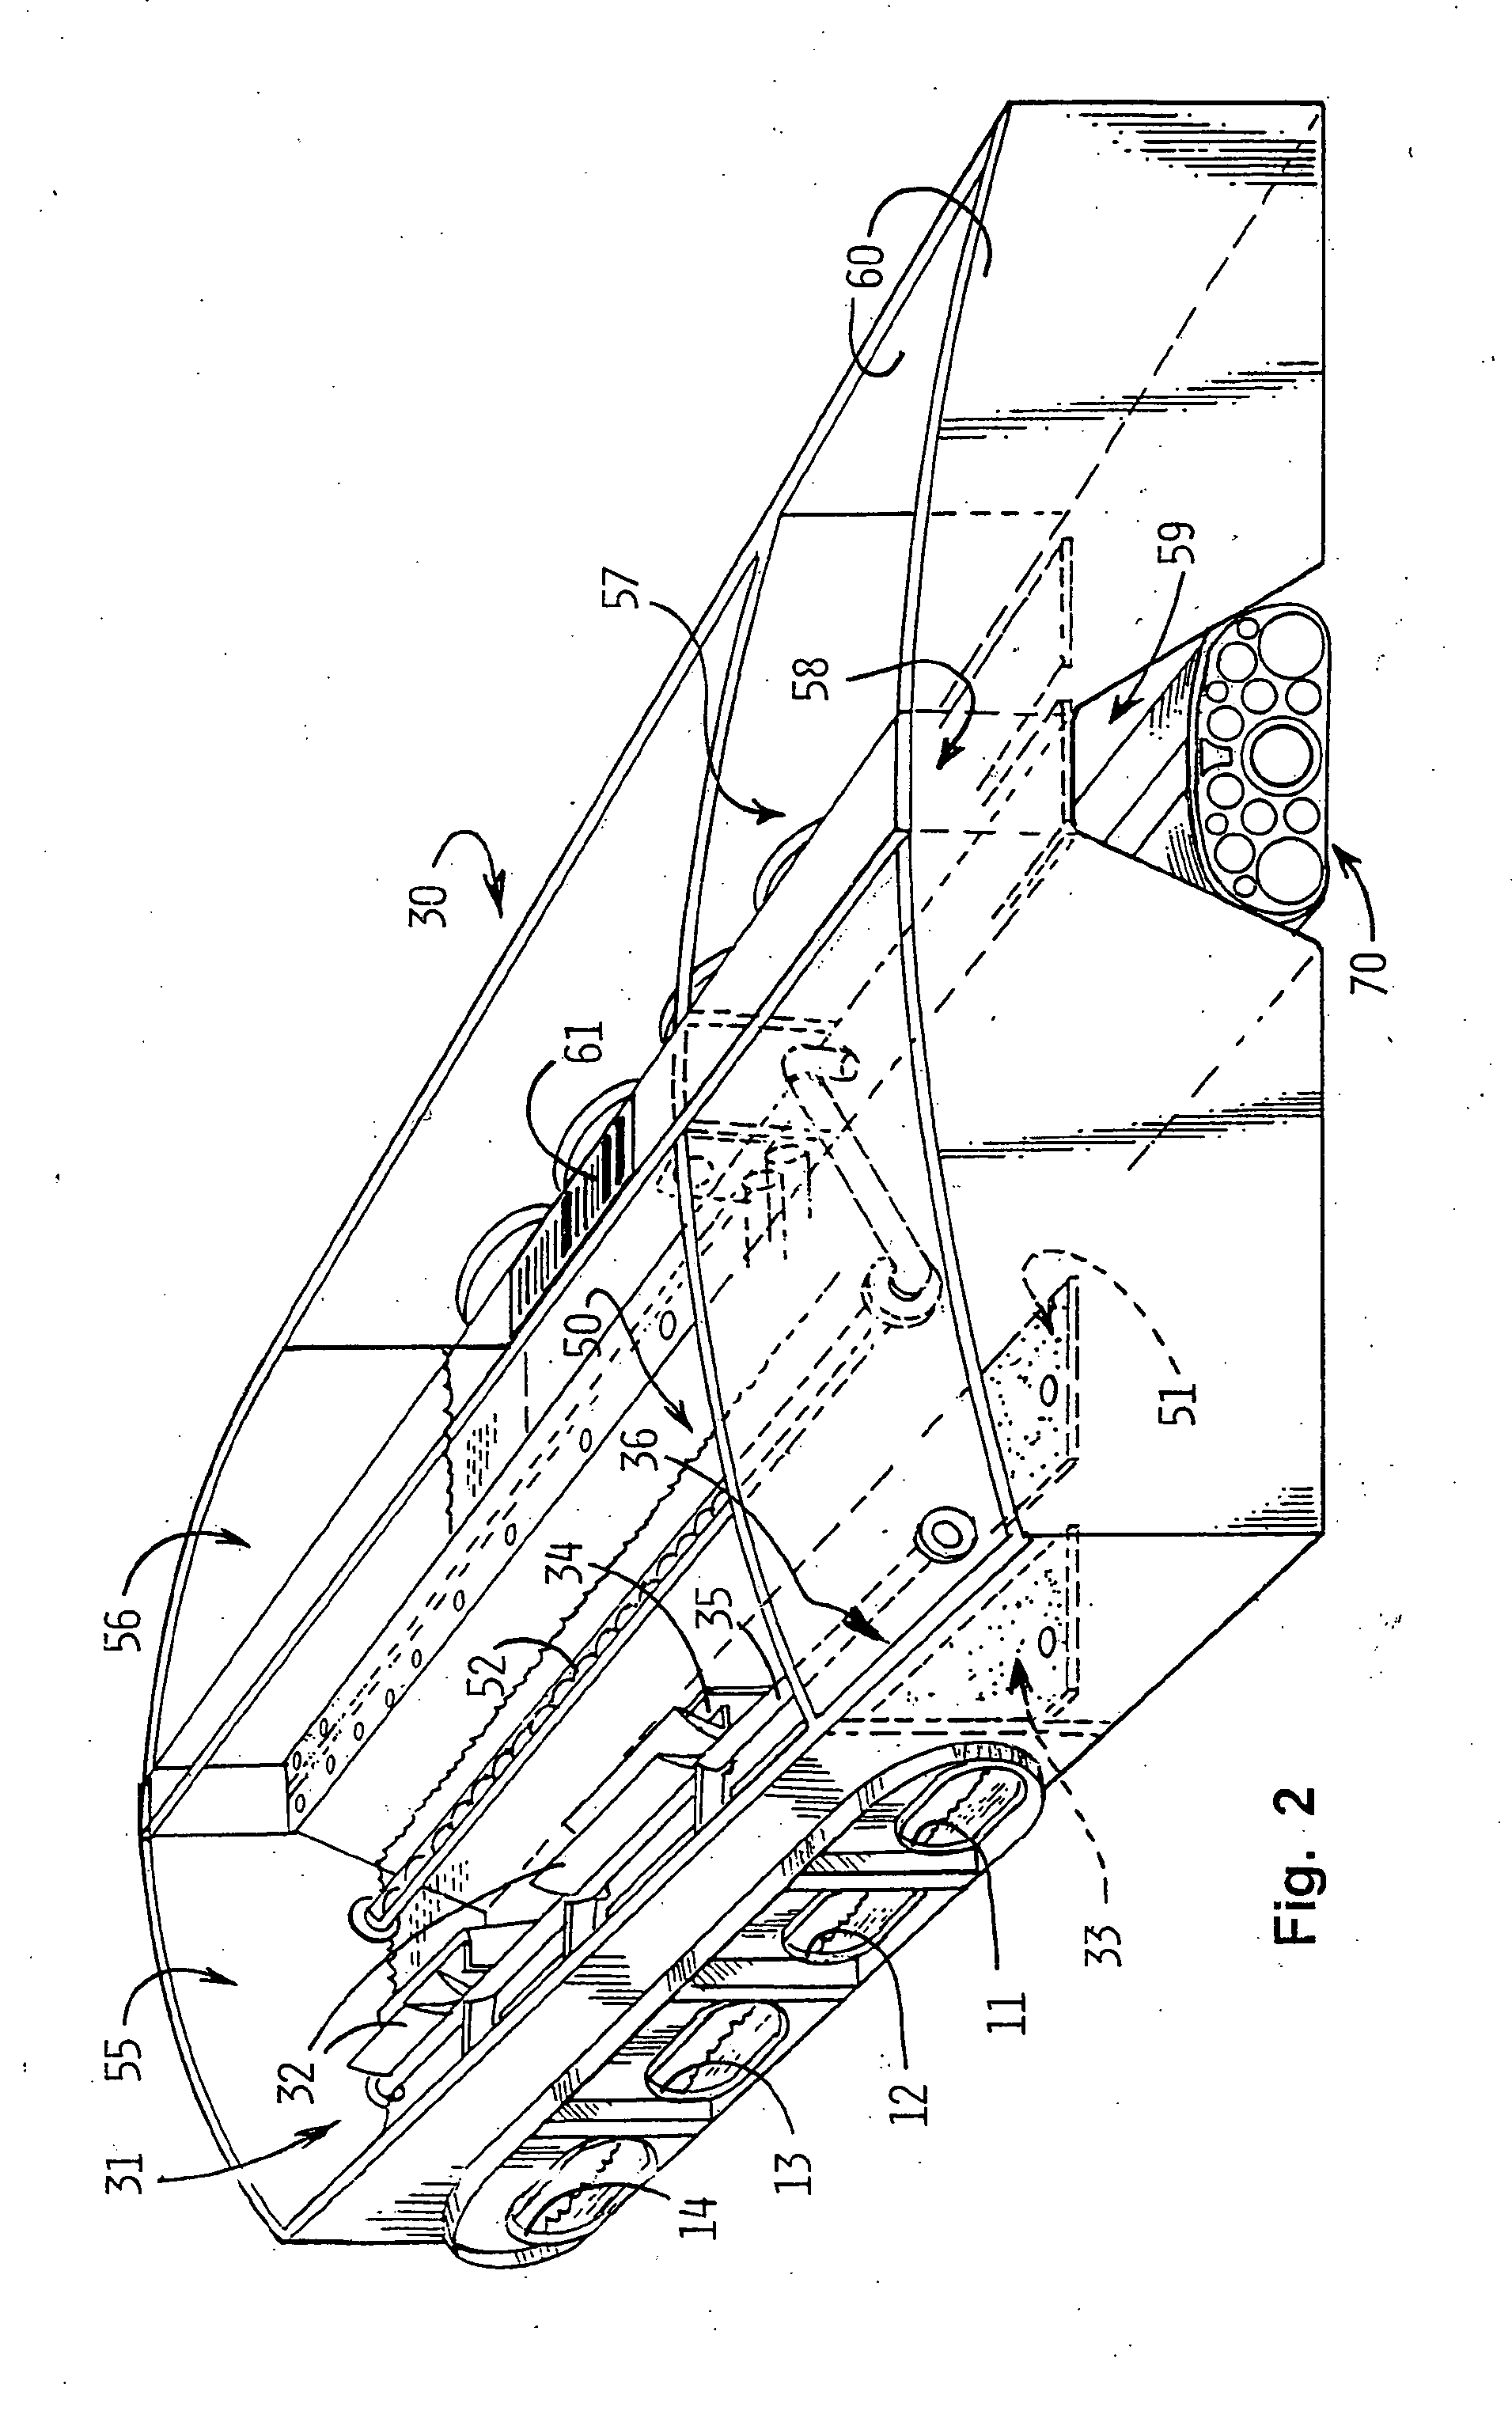 System for cultivation and processing of microorganisms, processing of products therefrom, and processing in drillhole reactors